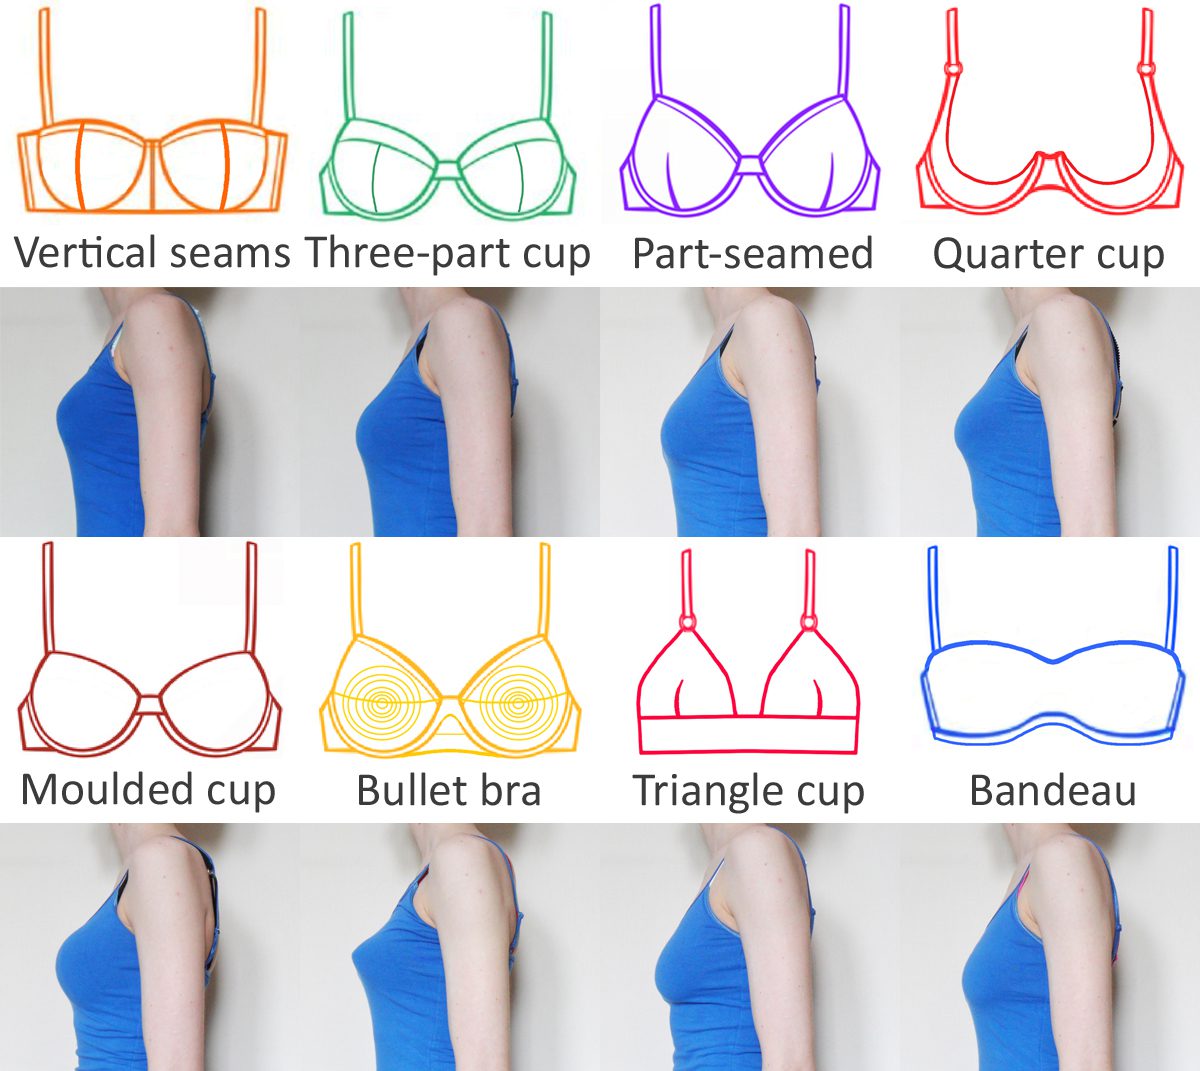 What are the different types of bra cups?